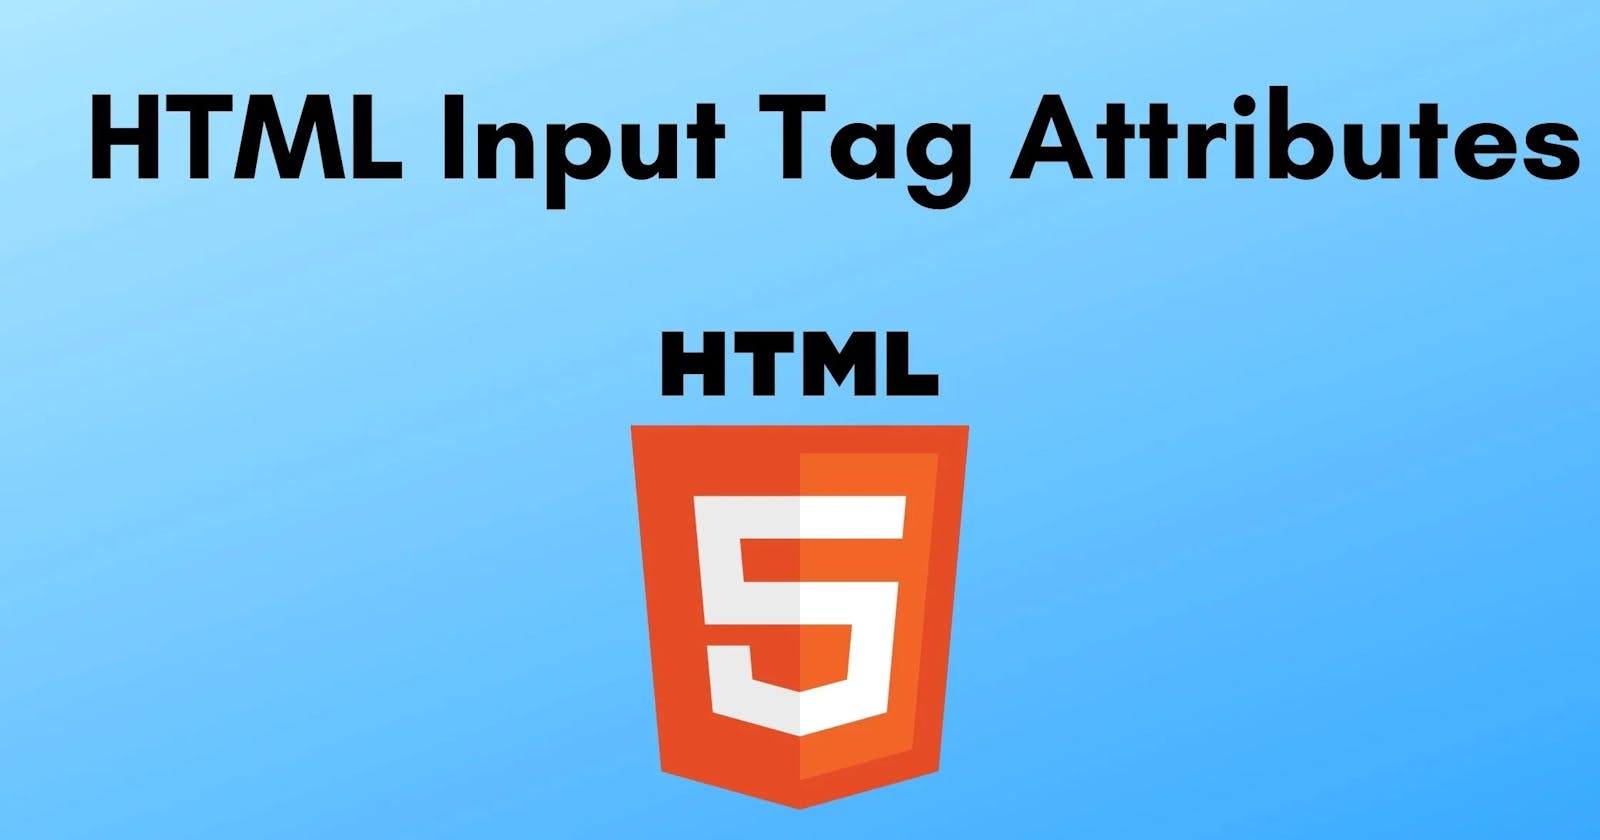 Input Elements - In HTML